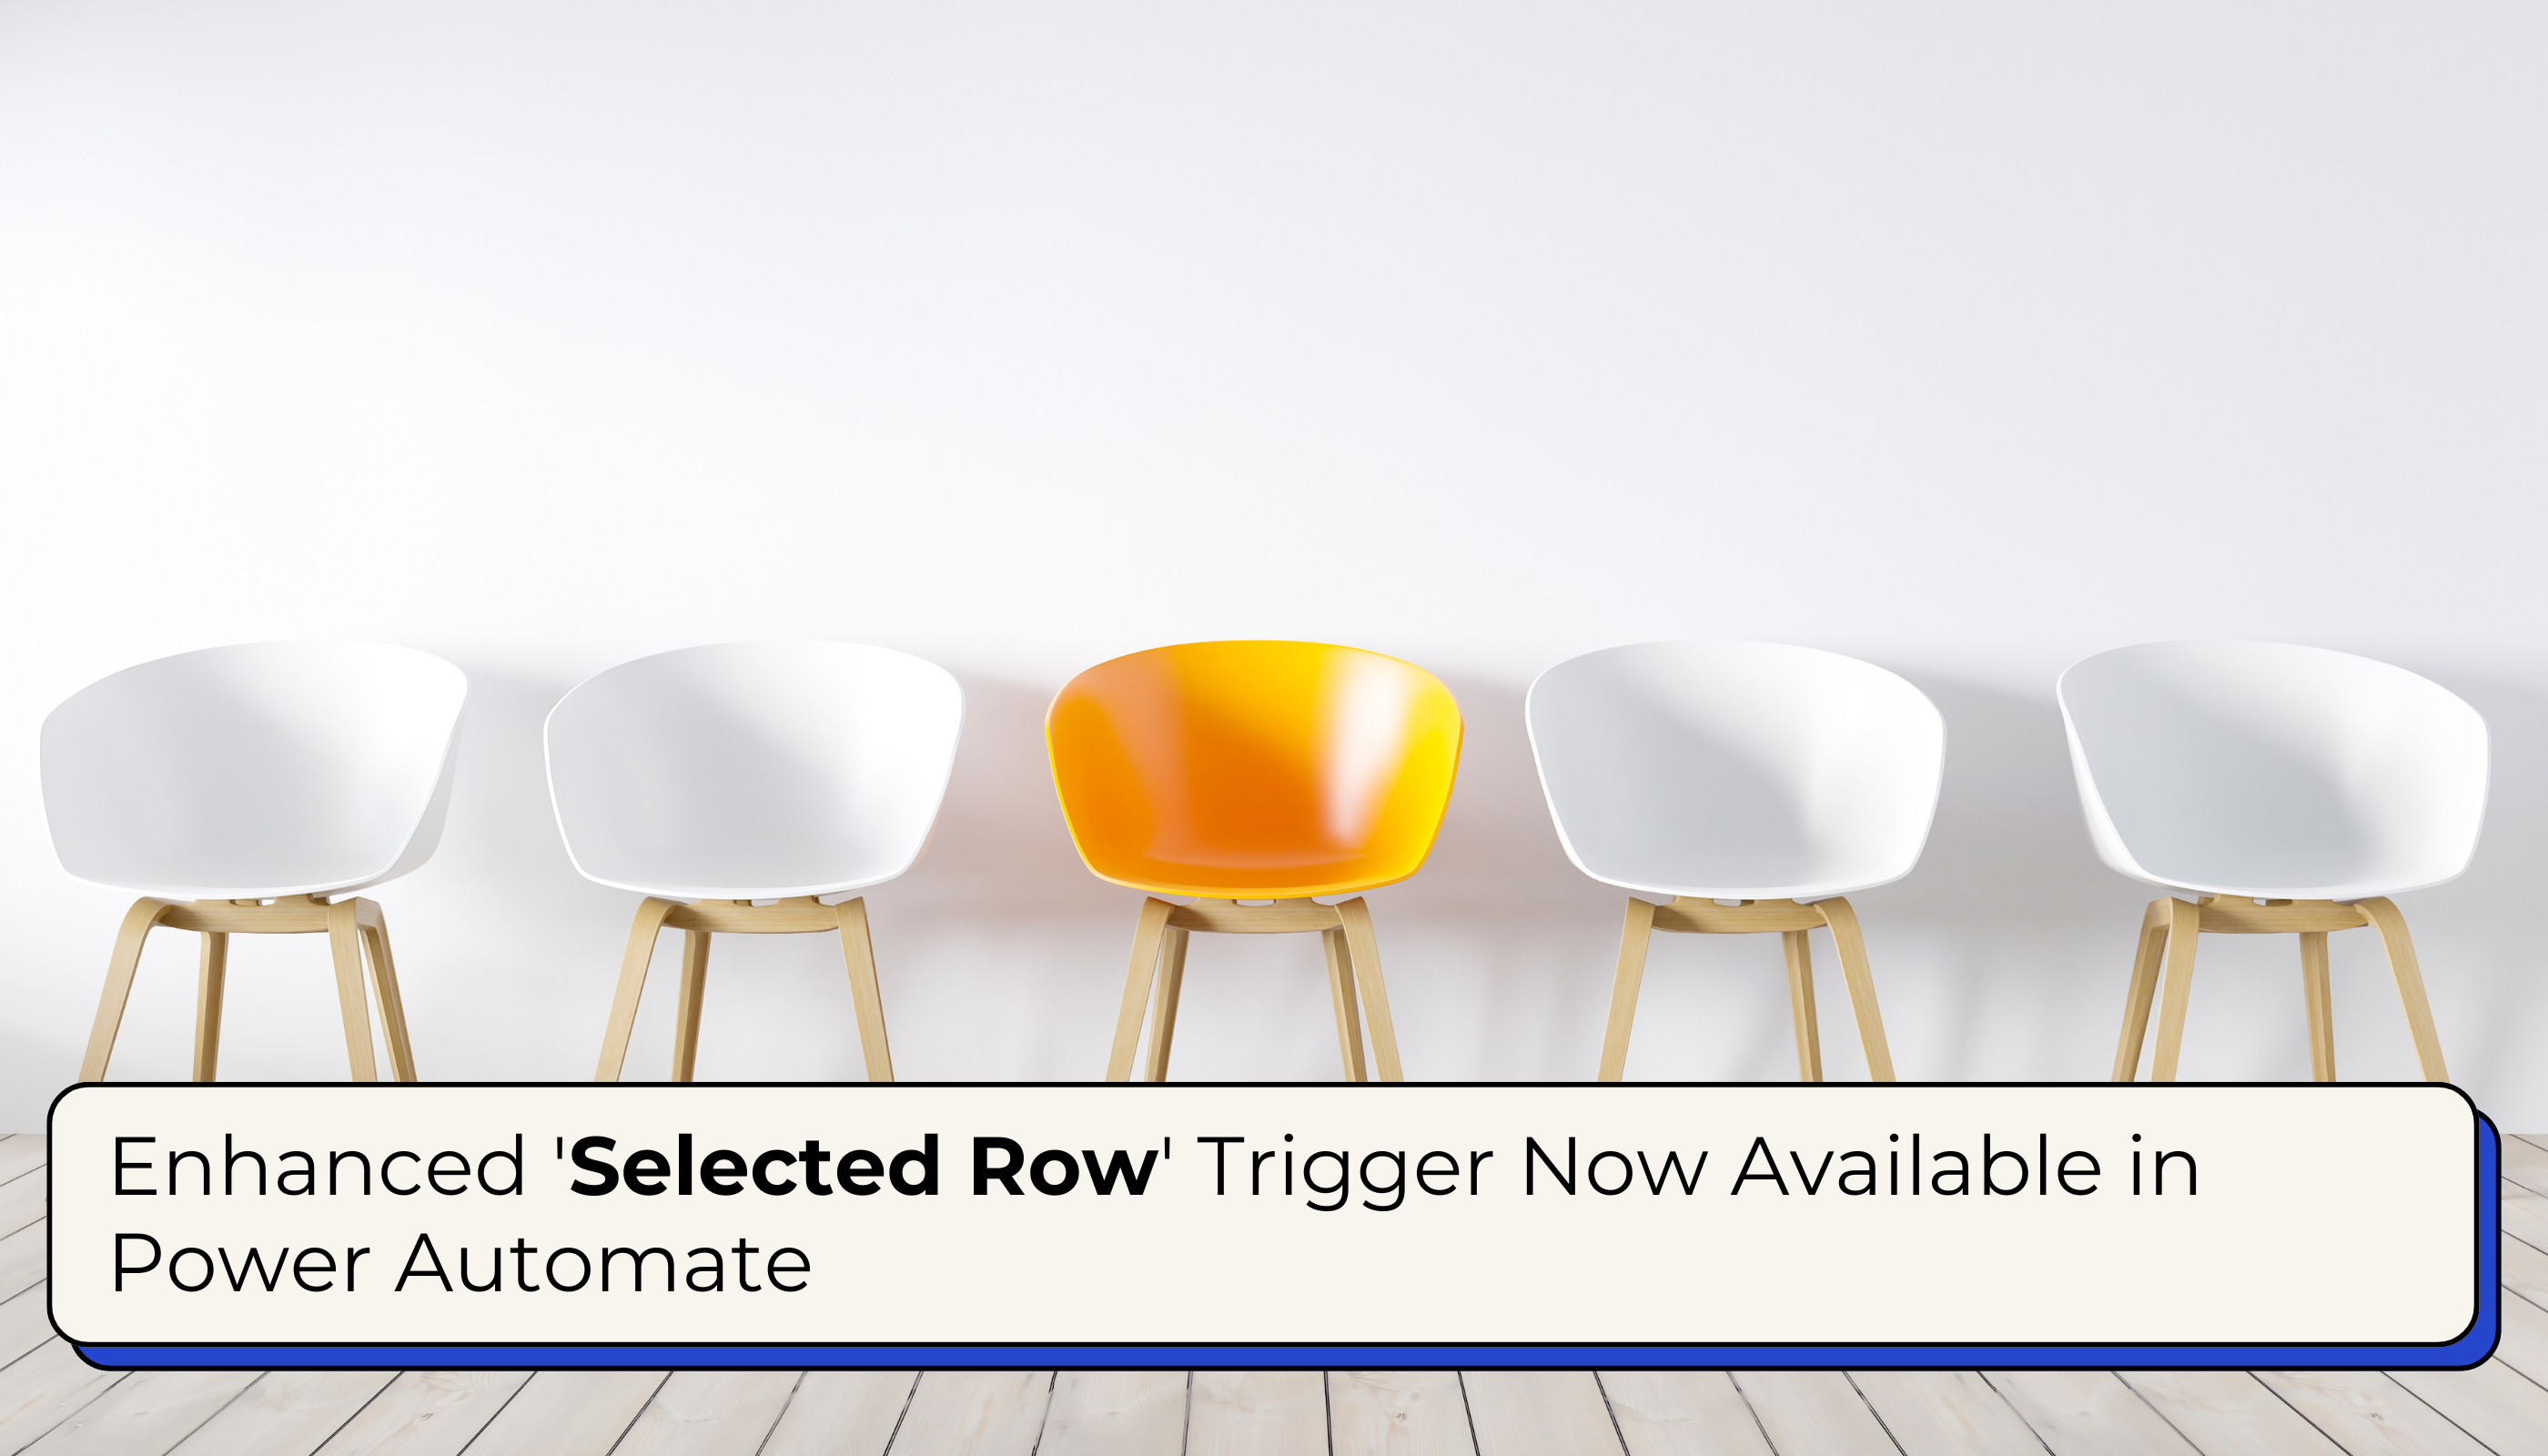 Enhanced ‘Selected Row’ Trigger Now Available in Power Automate